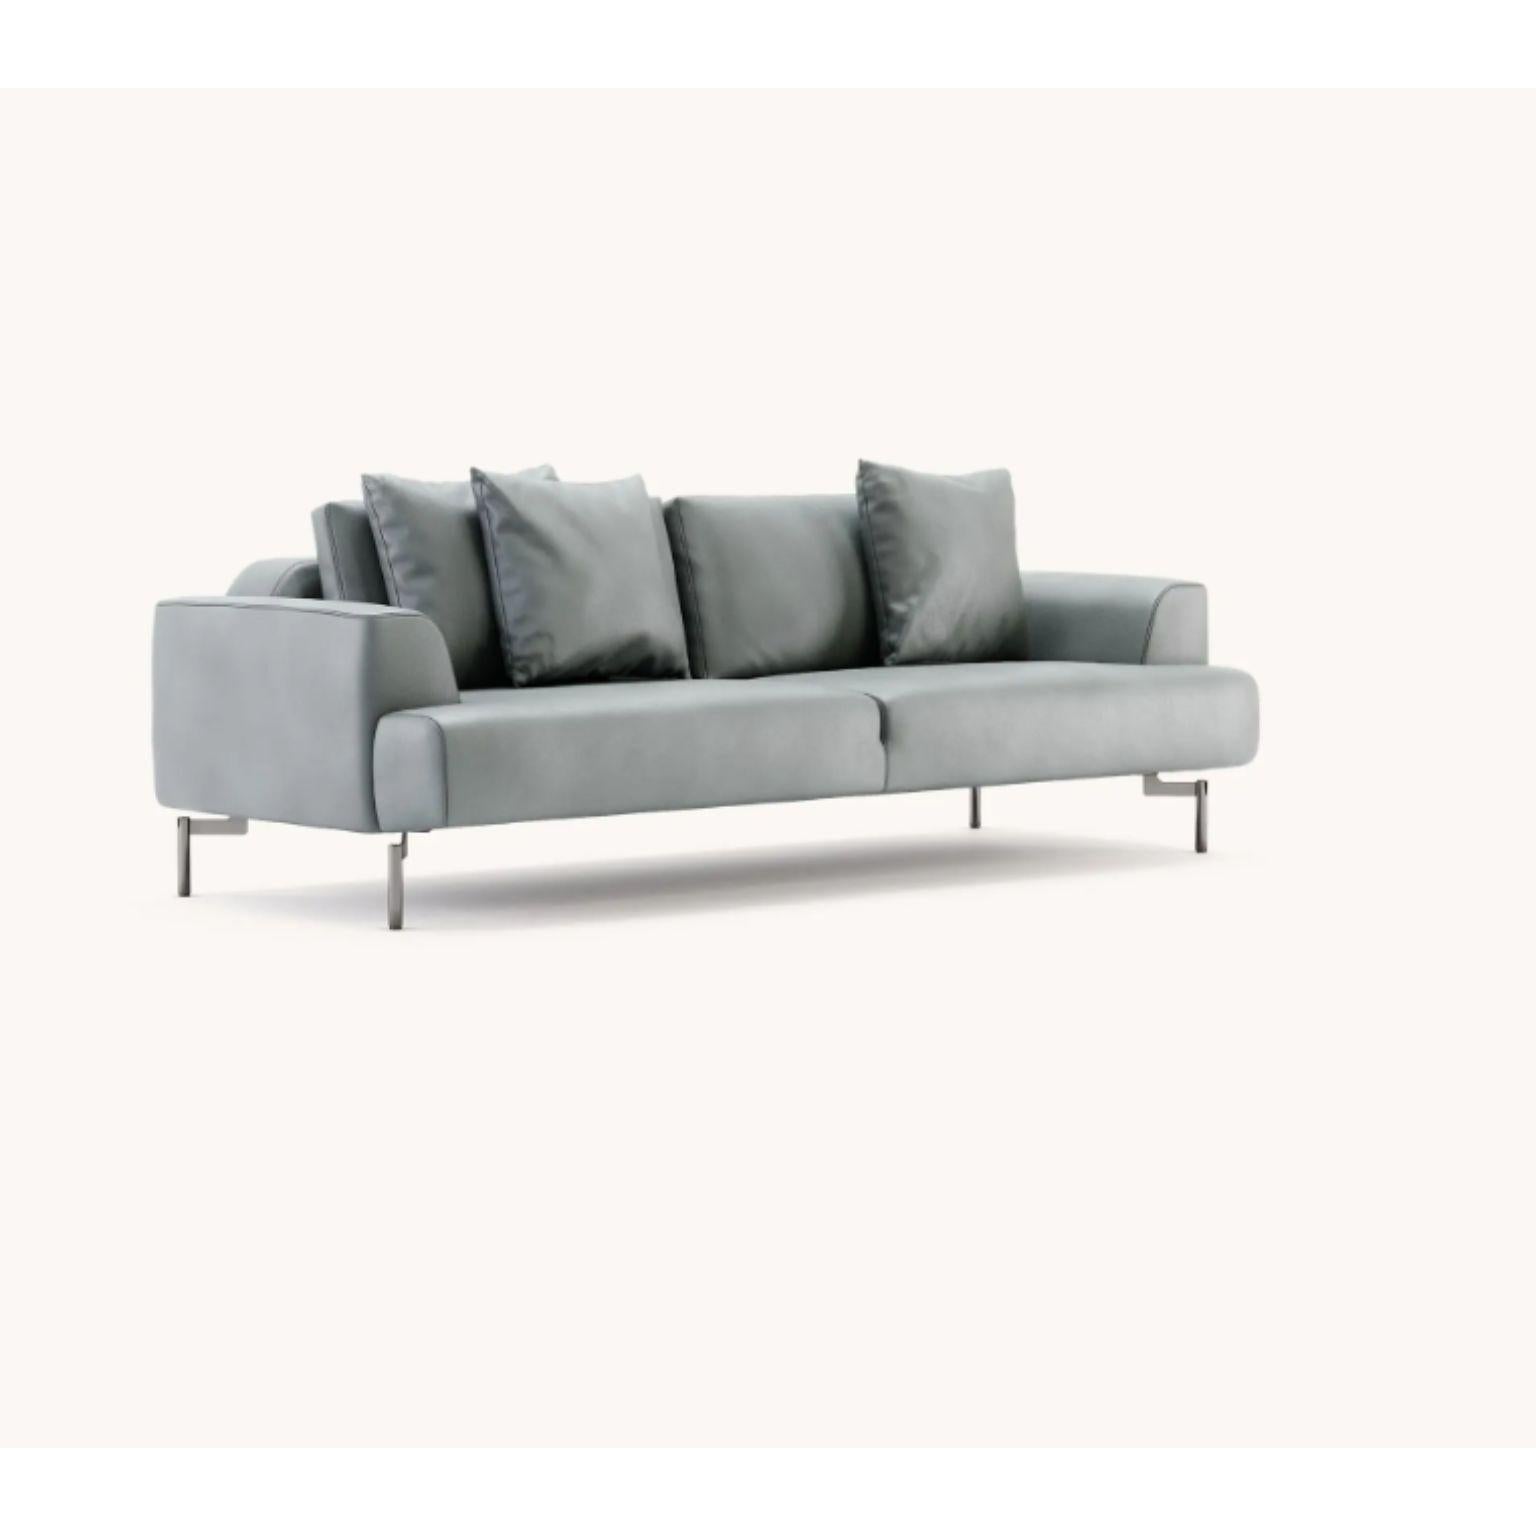 Taís 3 Seats Sofa by Domkapa
Materials: Natural leather (Desna Polvere), polished stainless steel. 
Dimensions: W 230 x D 95 x H 88 cm.
Also available in different materials. Please contact us.
with 3 pillows included in the same fabric as the